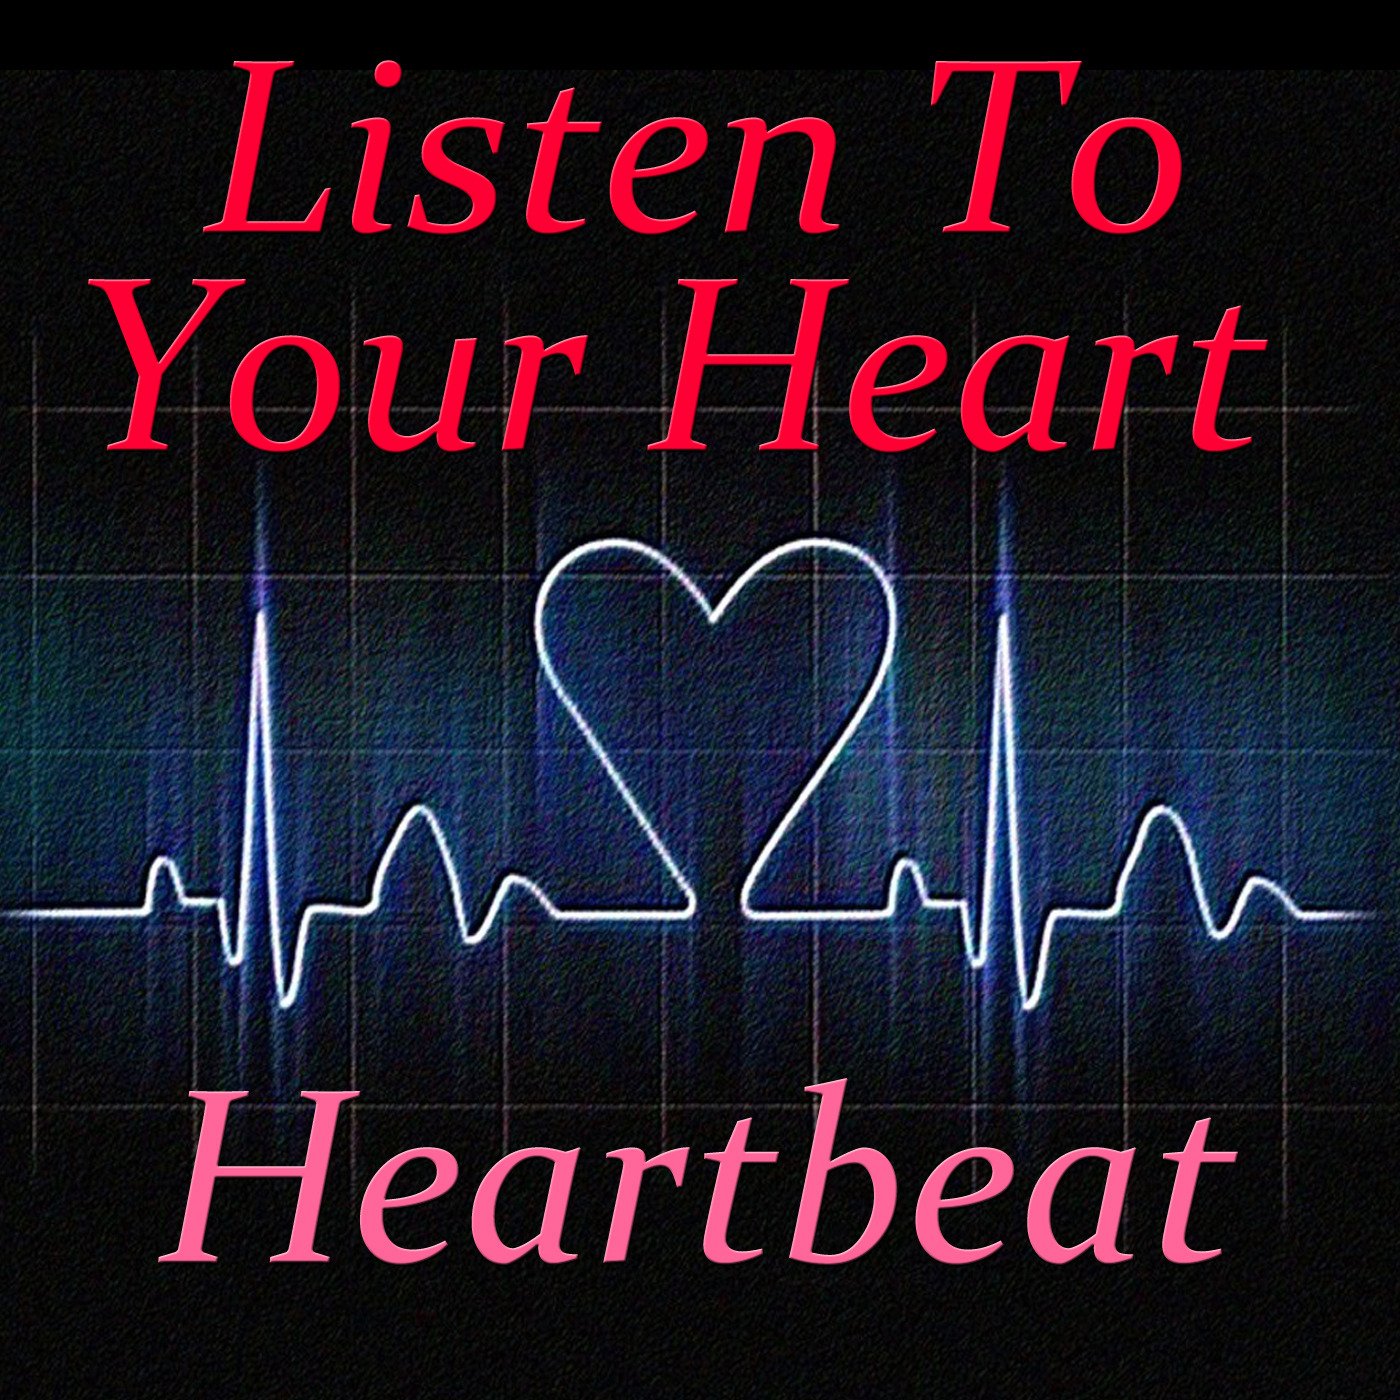 Heartbeat mp3. Listen to your Heart. Группа Heartbeat. Listen your Heart. Listen to your Heart обложка.